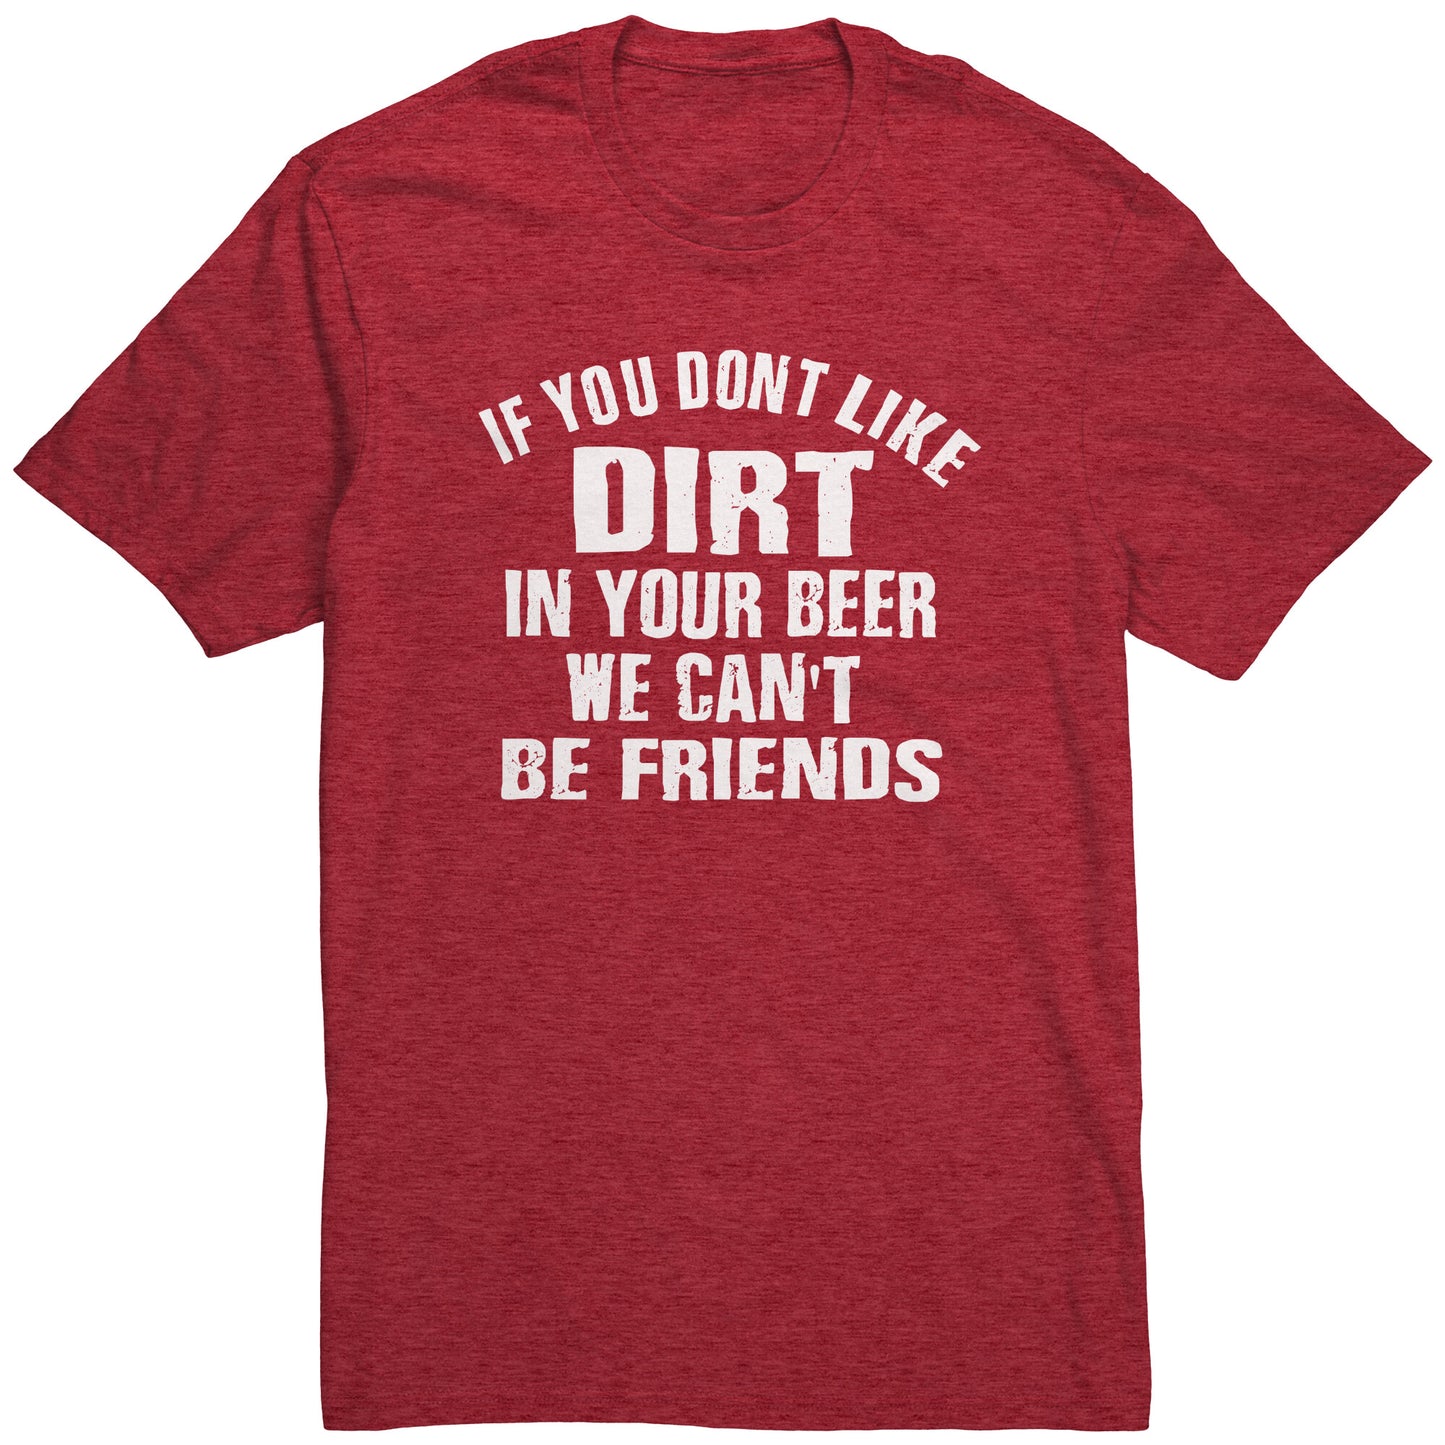 IF YOU DON'T LIKE DIRT IN YOUR BEER WE CAN'T BE FRIENDS MEN'S T-SHIRT